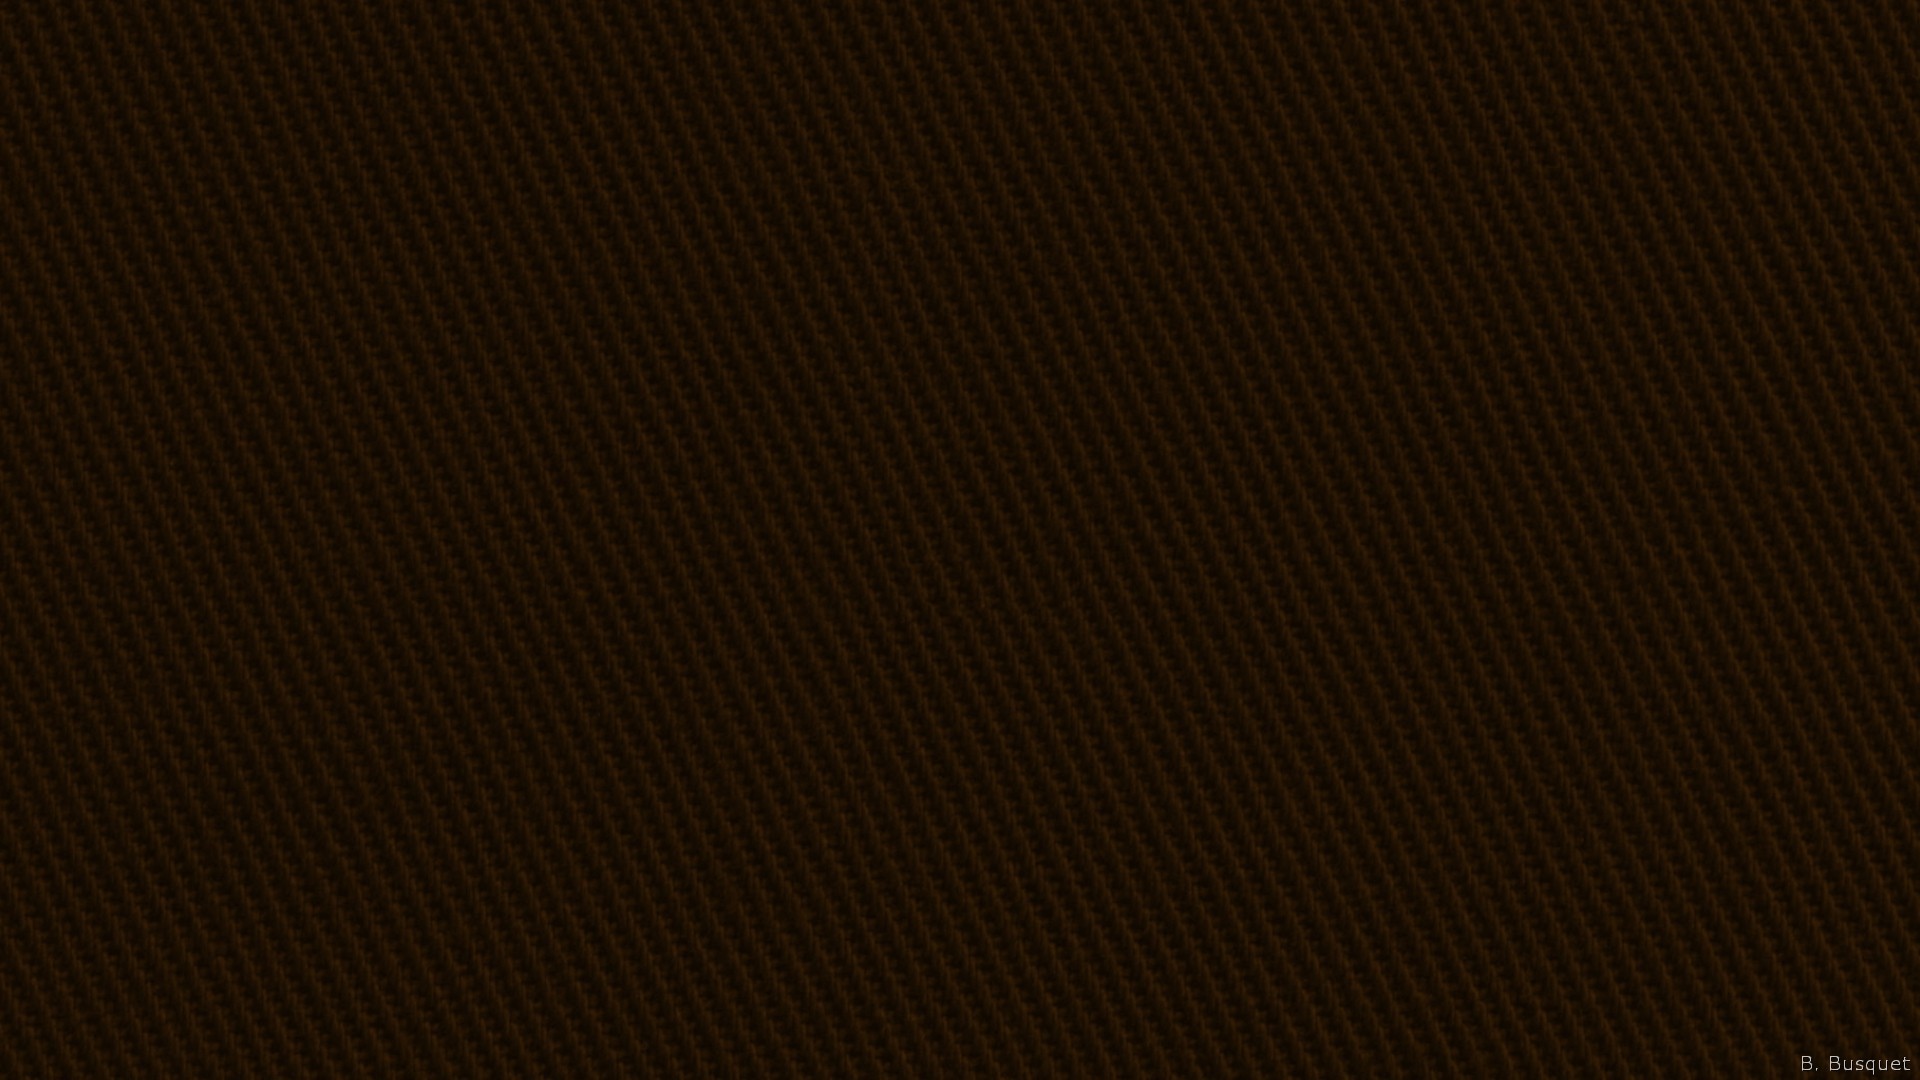 Simple dark brown wallpaper with a weave pattern